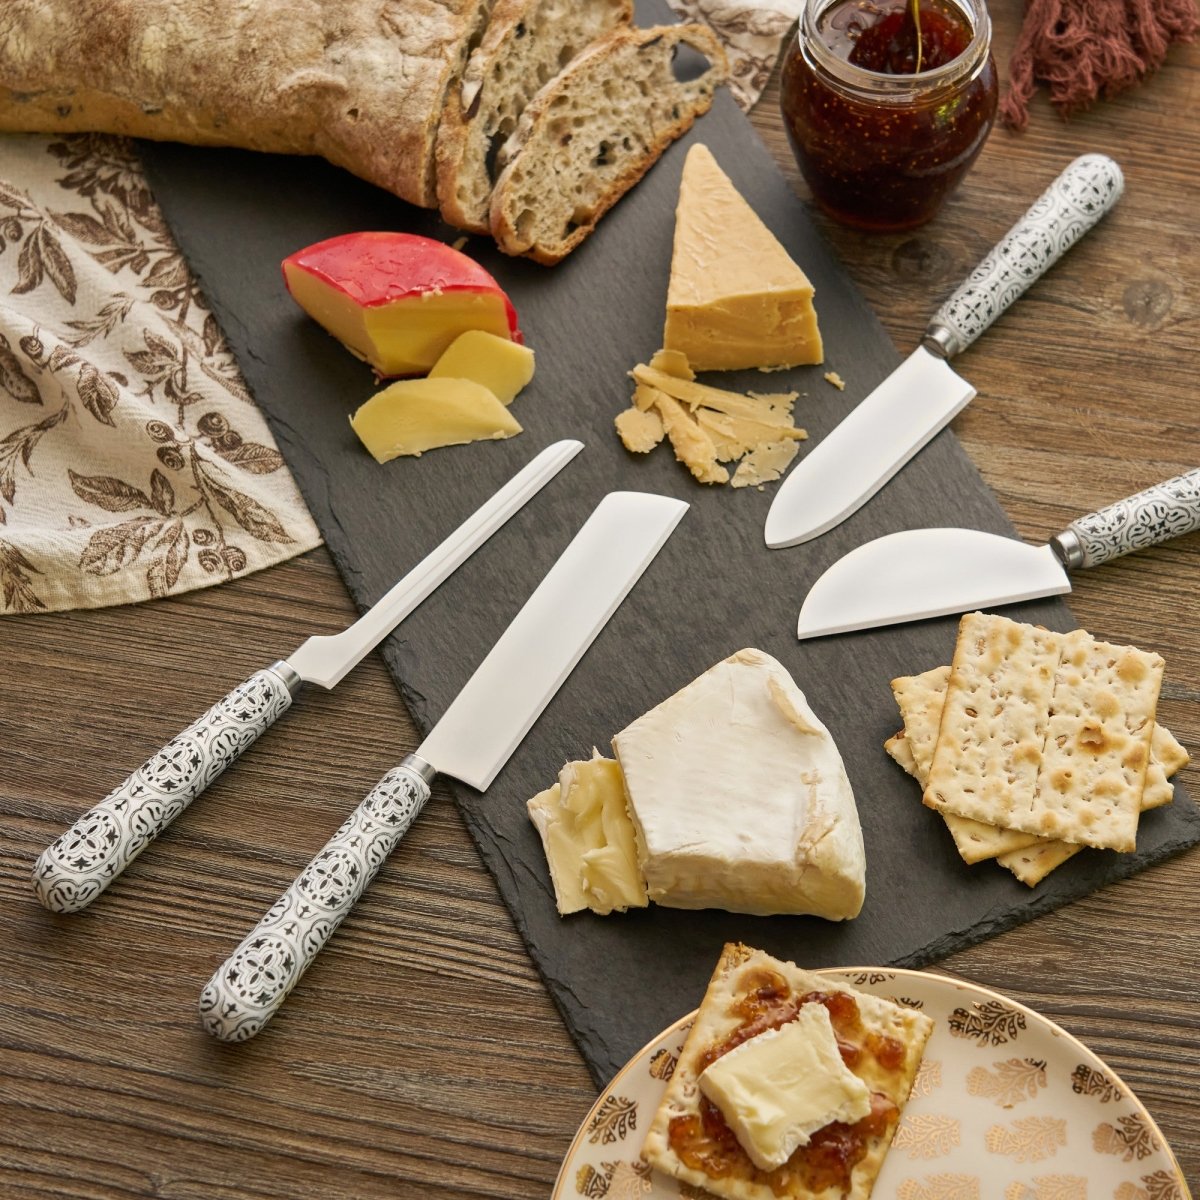 Cheese Knife, Stainless Steel Forked Cheese Knife, All Purpose Cheese Knife,  Cheese Spreader, Gift Add On 